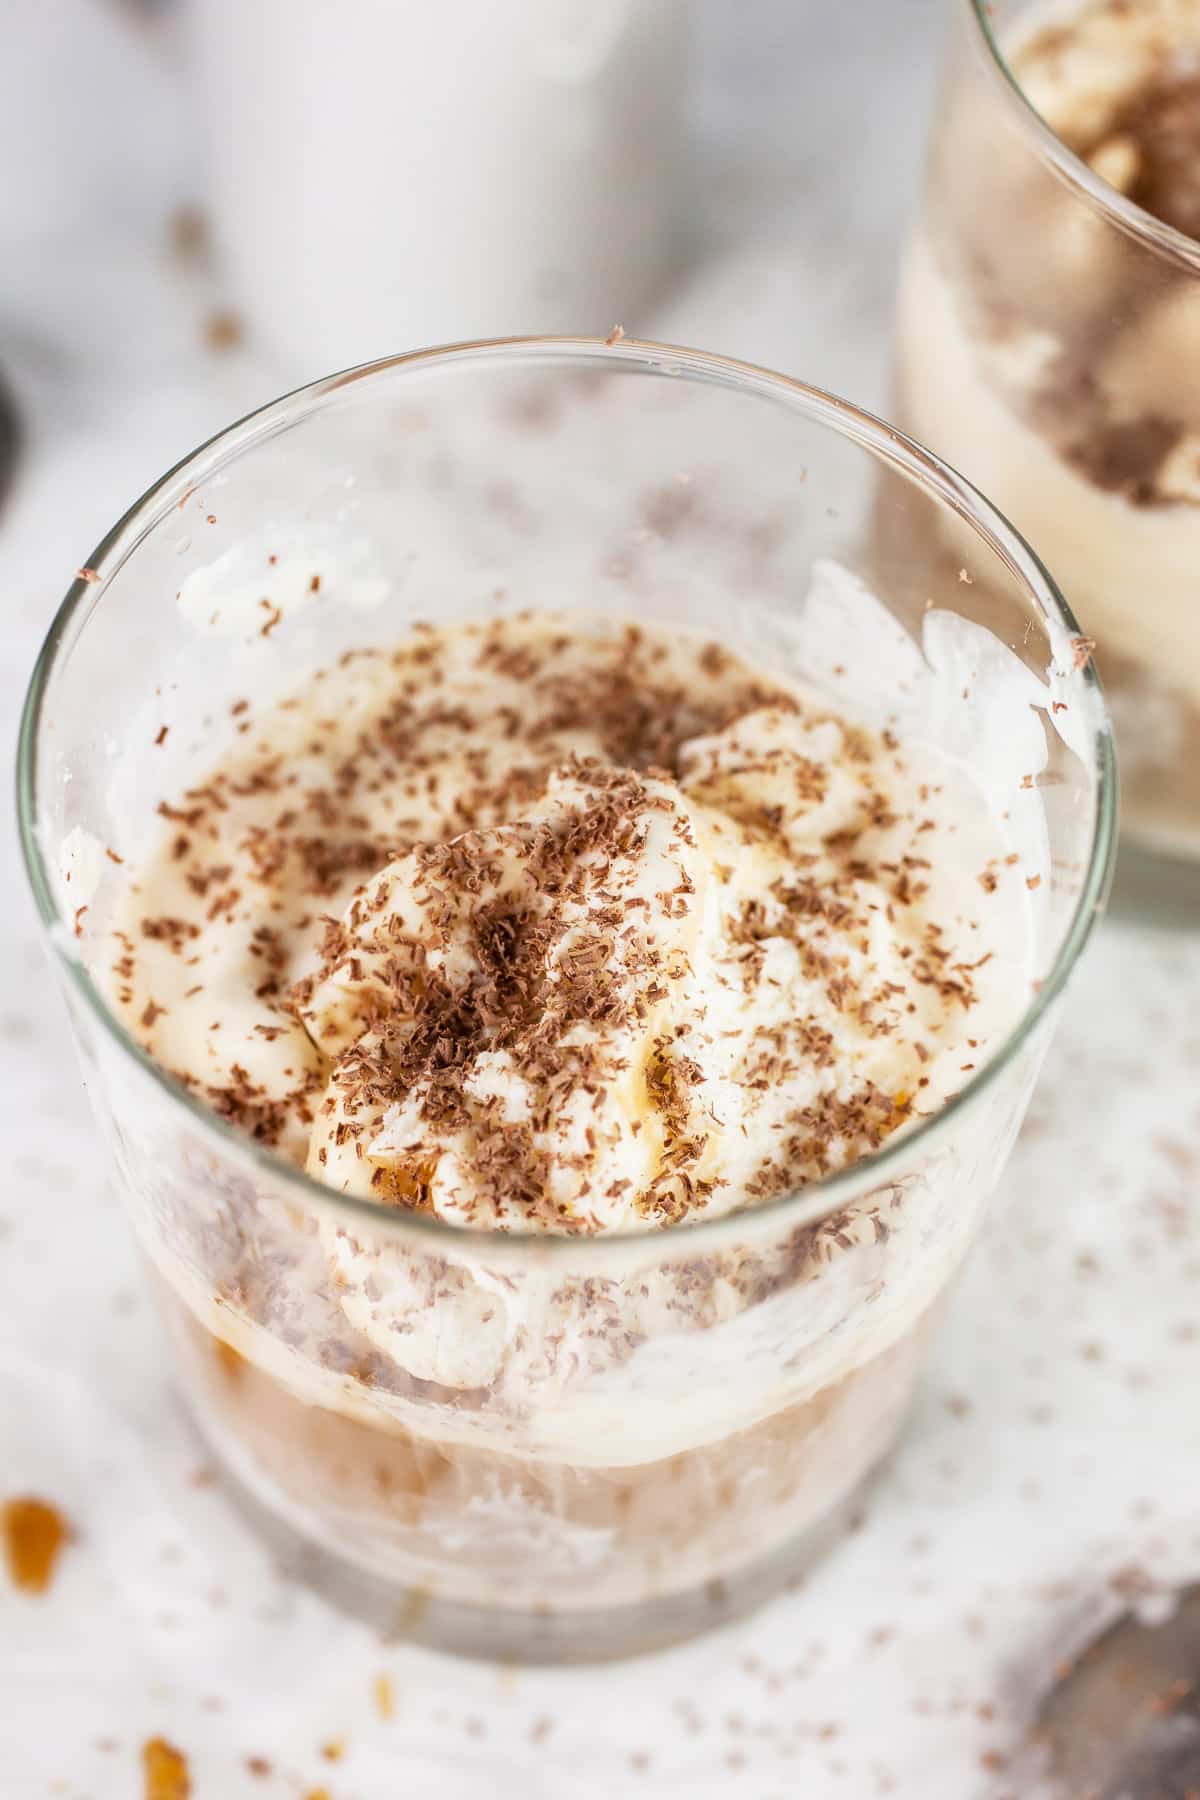 Baileys ice cream affogato garnished with chocolate shavings in glasses.